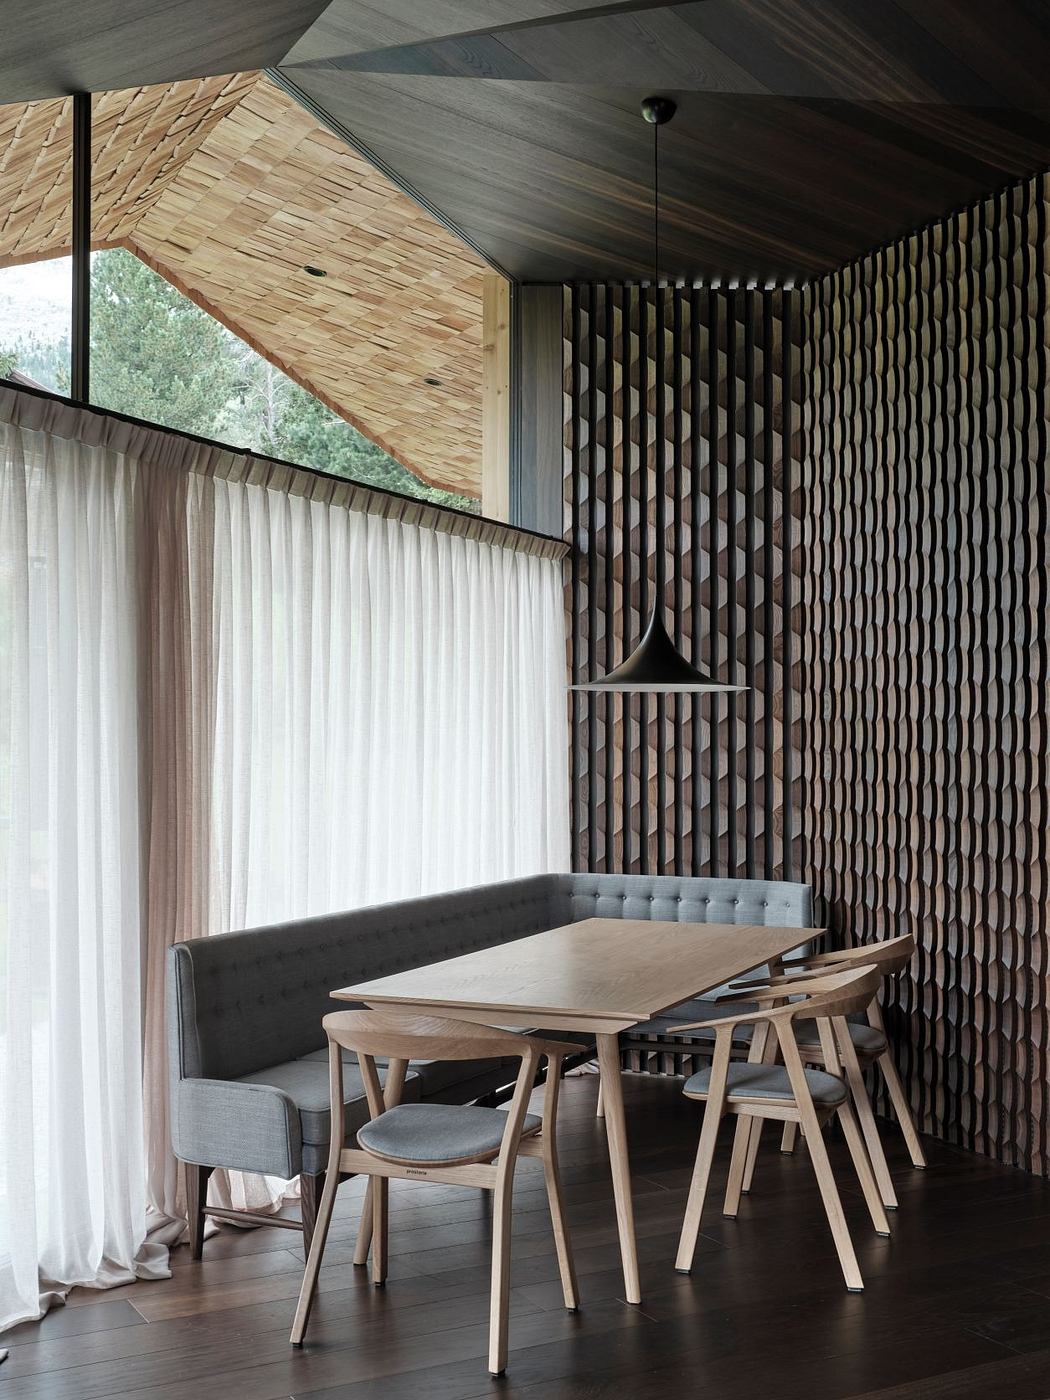 Modern dining area with wooden furniture and textured wall design.